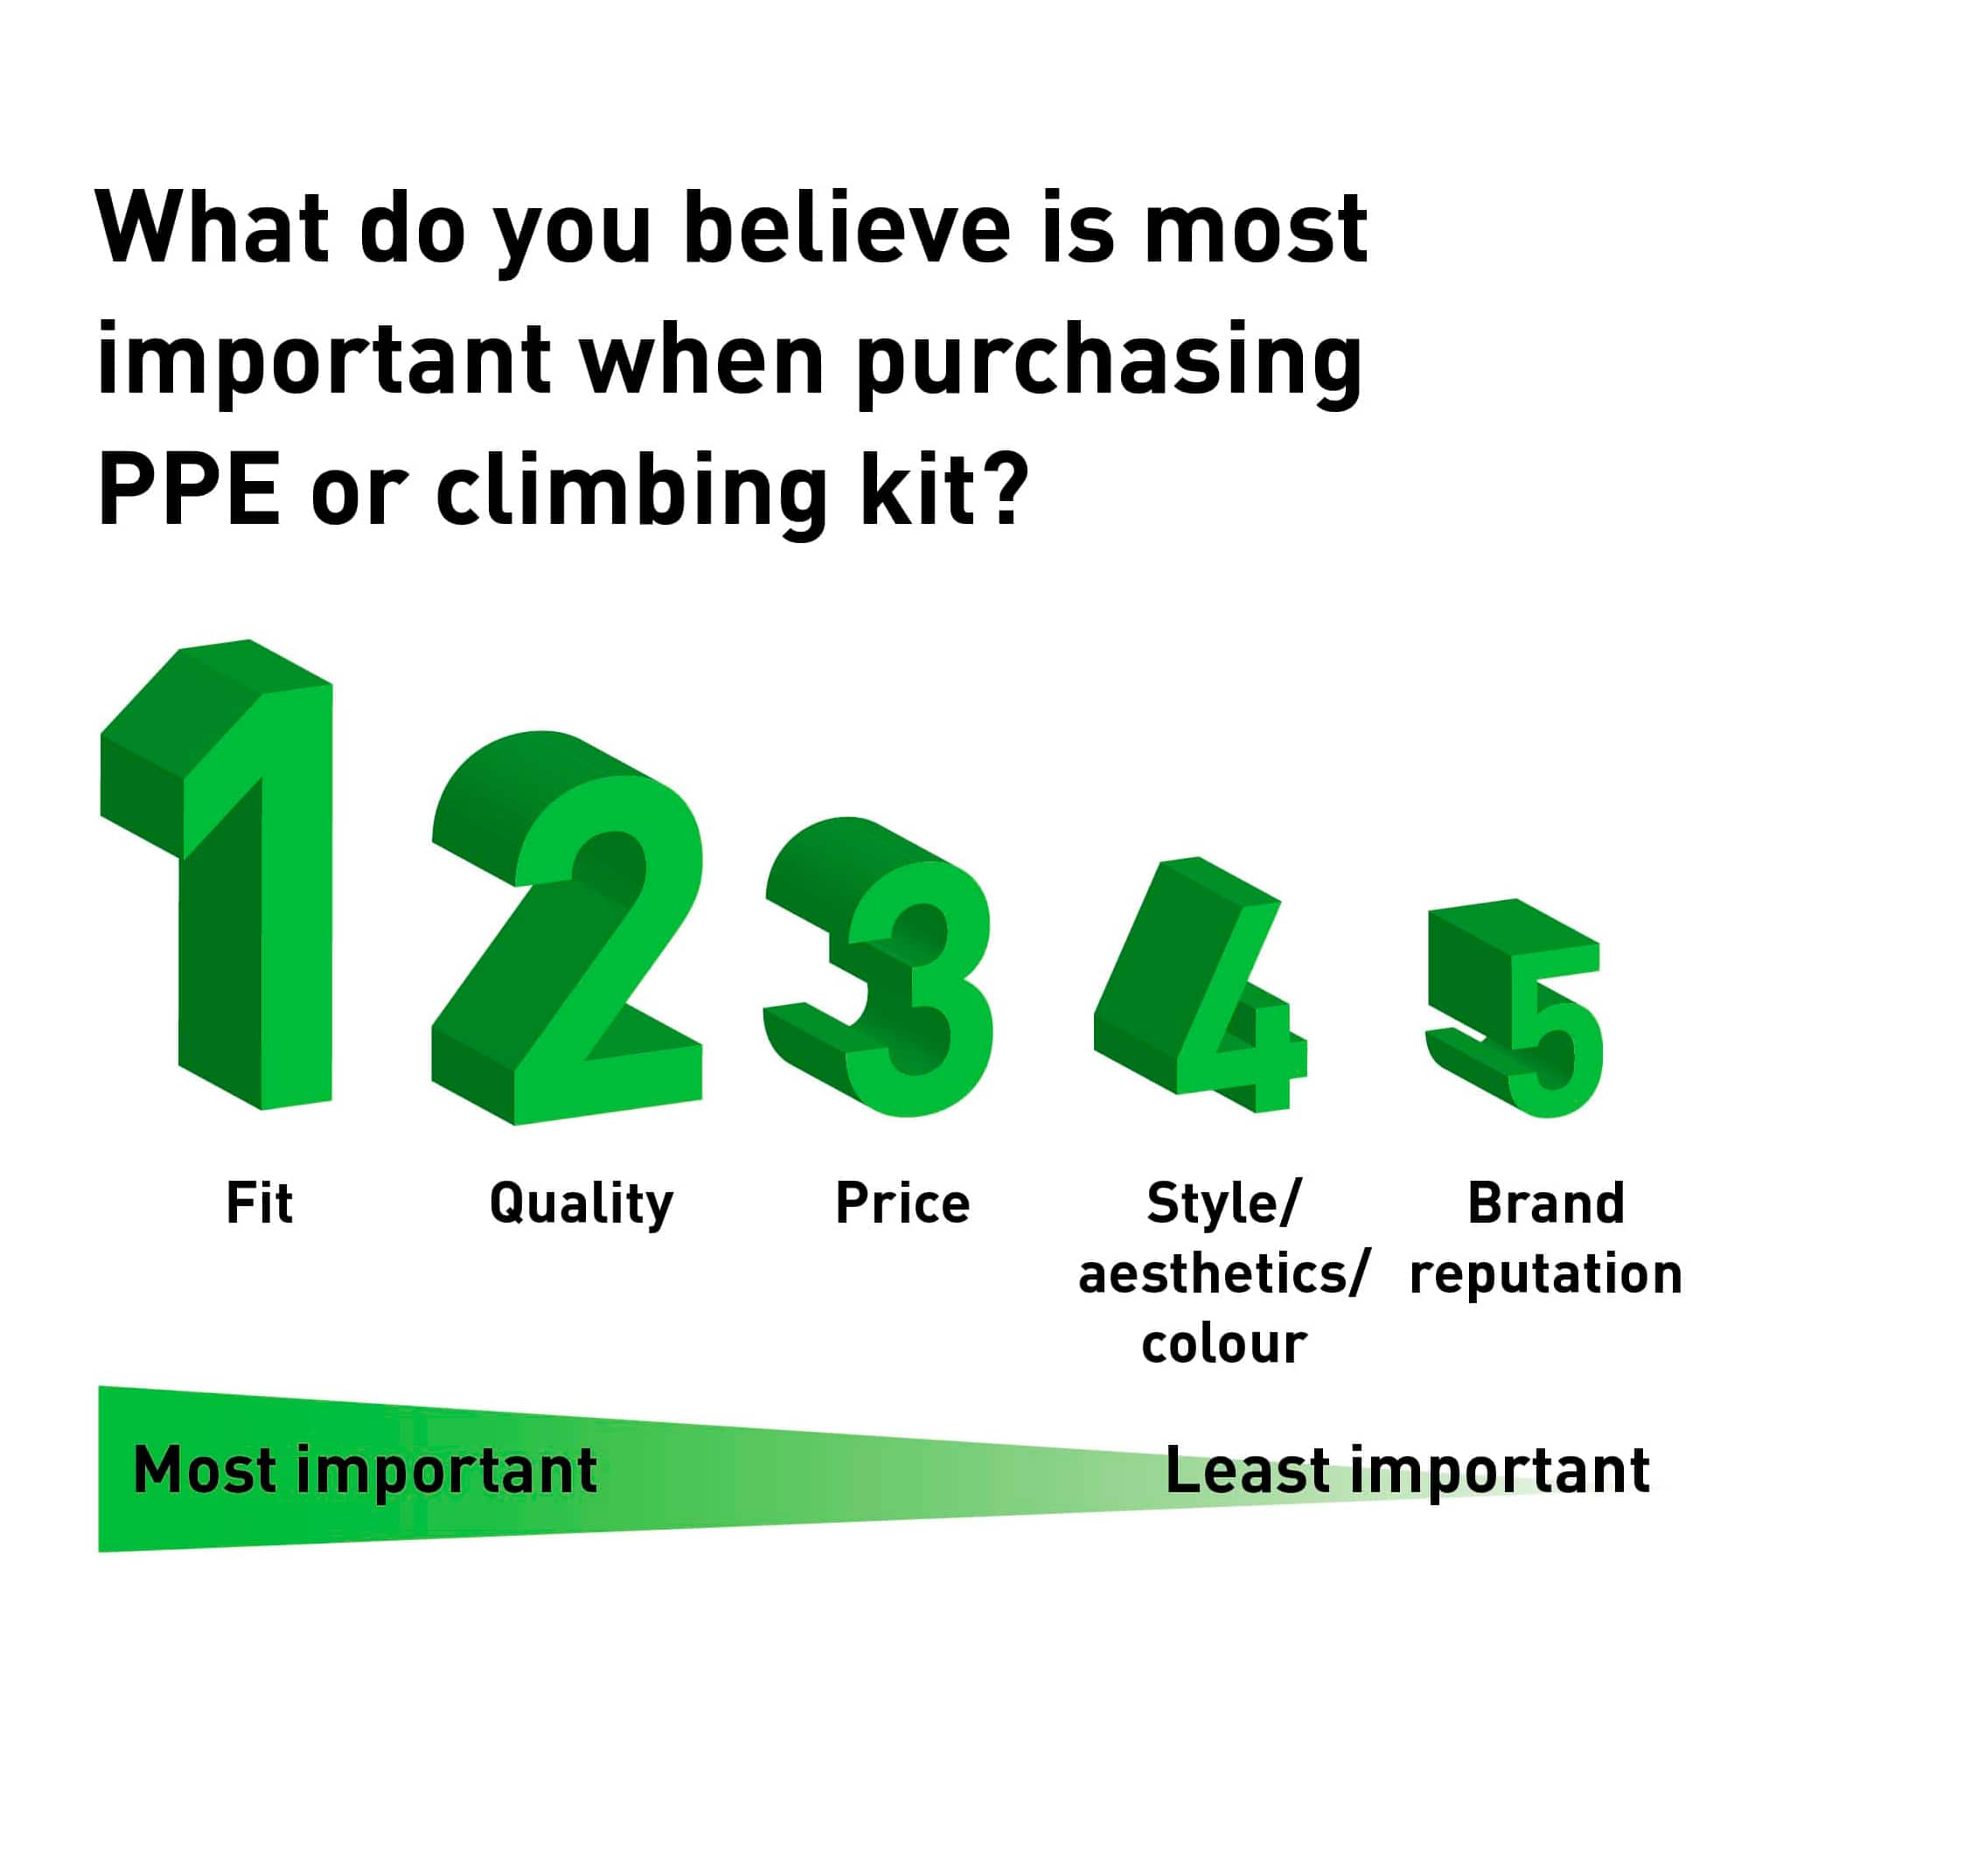 What do you believe is most important when purchasing PPE or climbing kit?